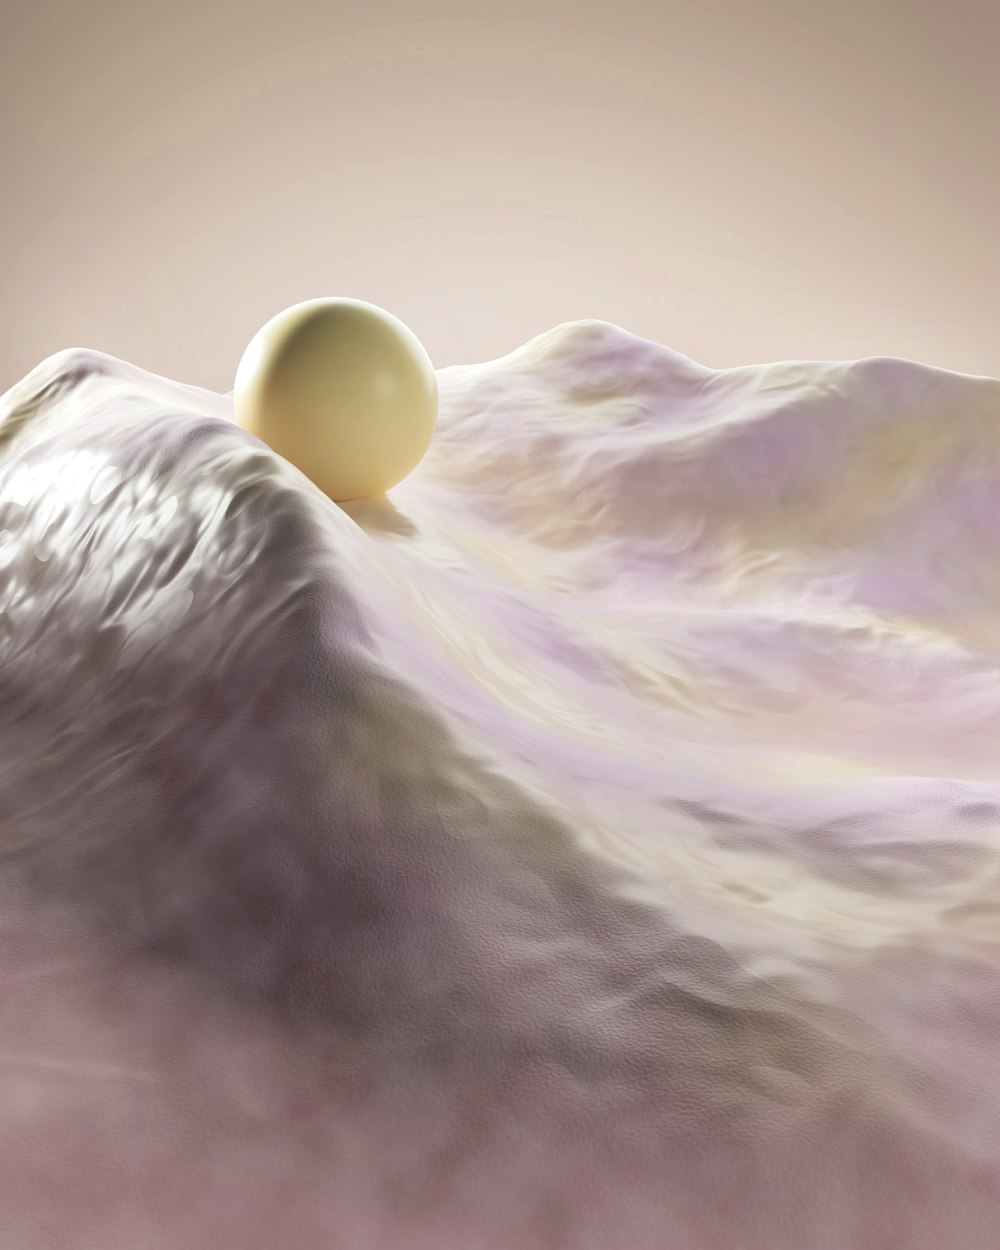 a painting of an egg on top of a mountain